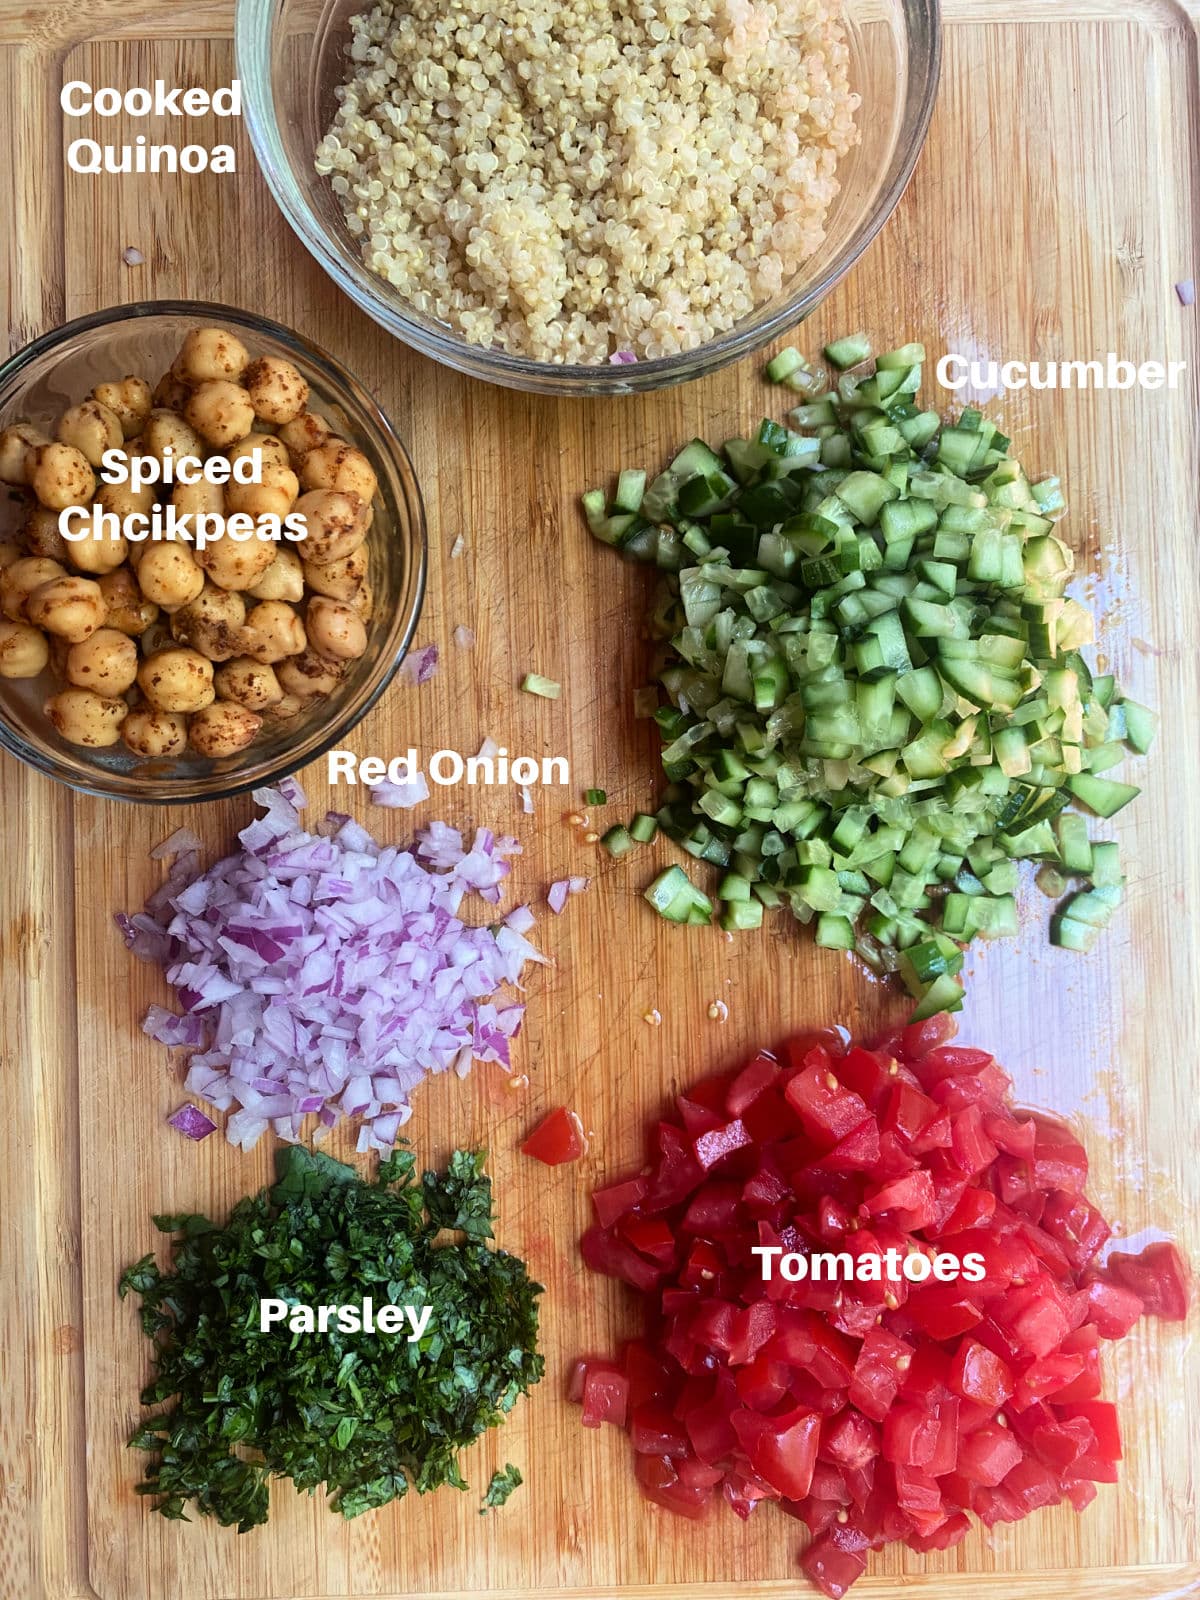 Quinoa bowl ingredients labeled
